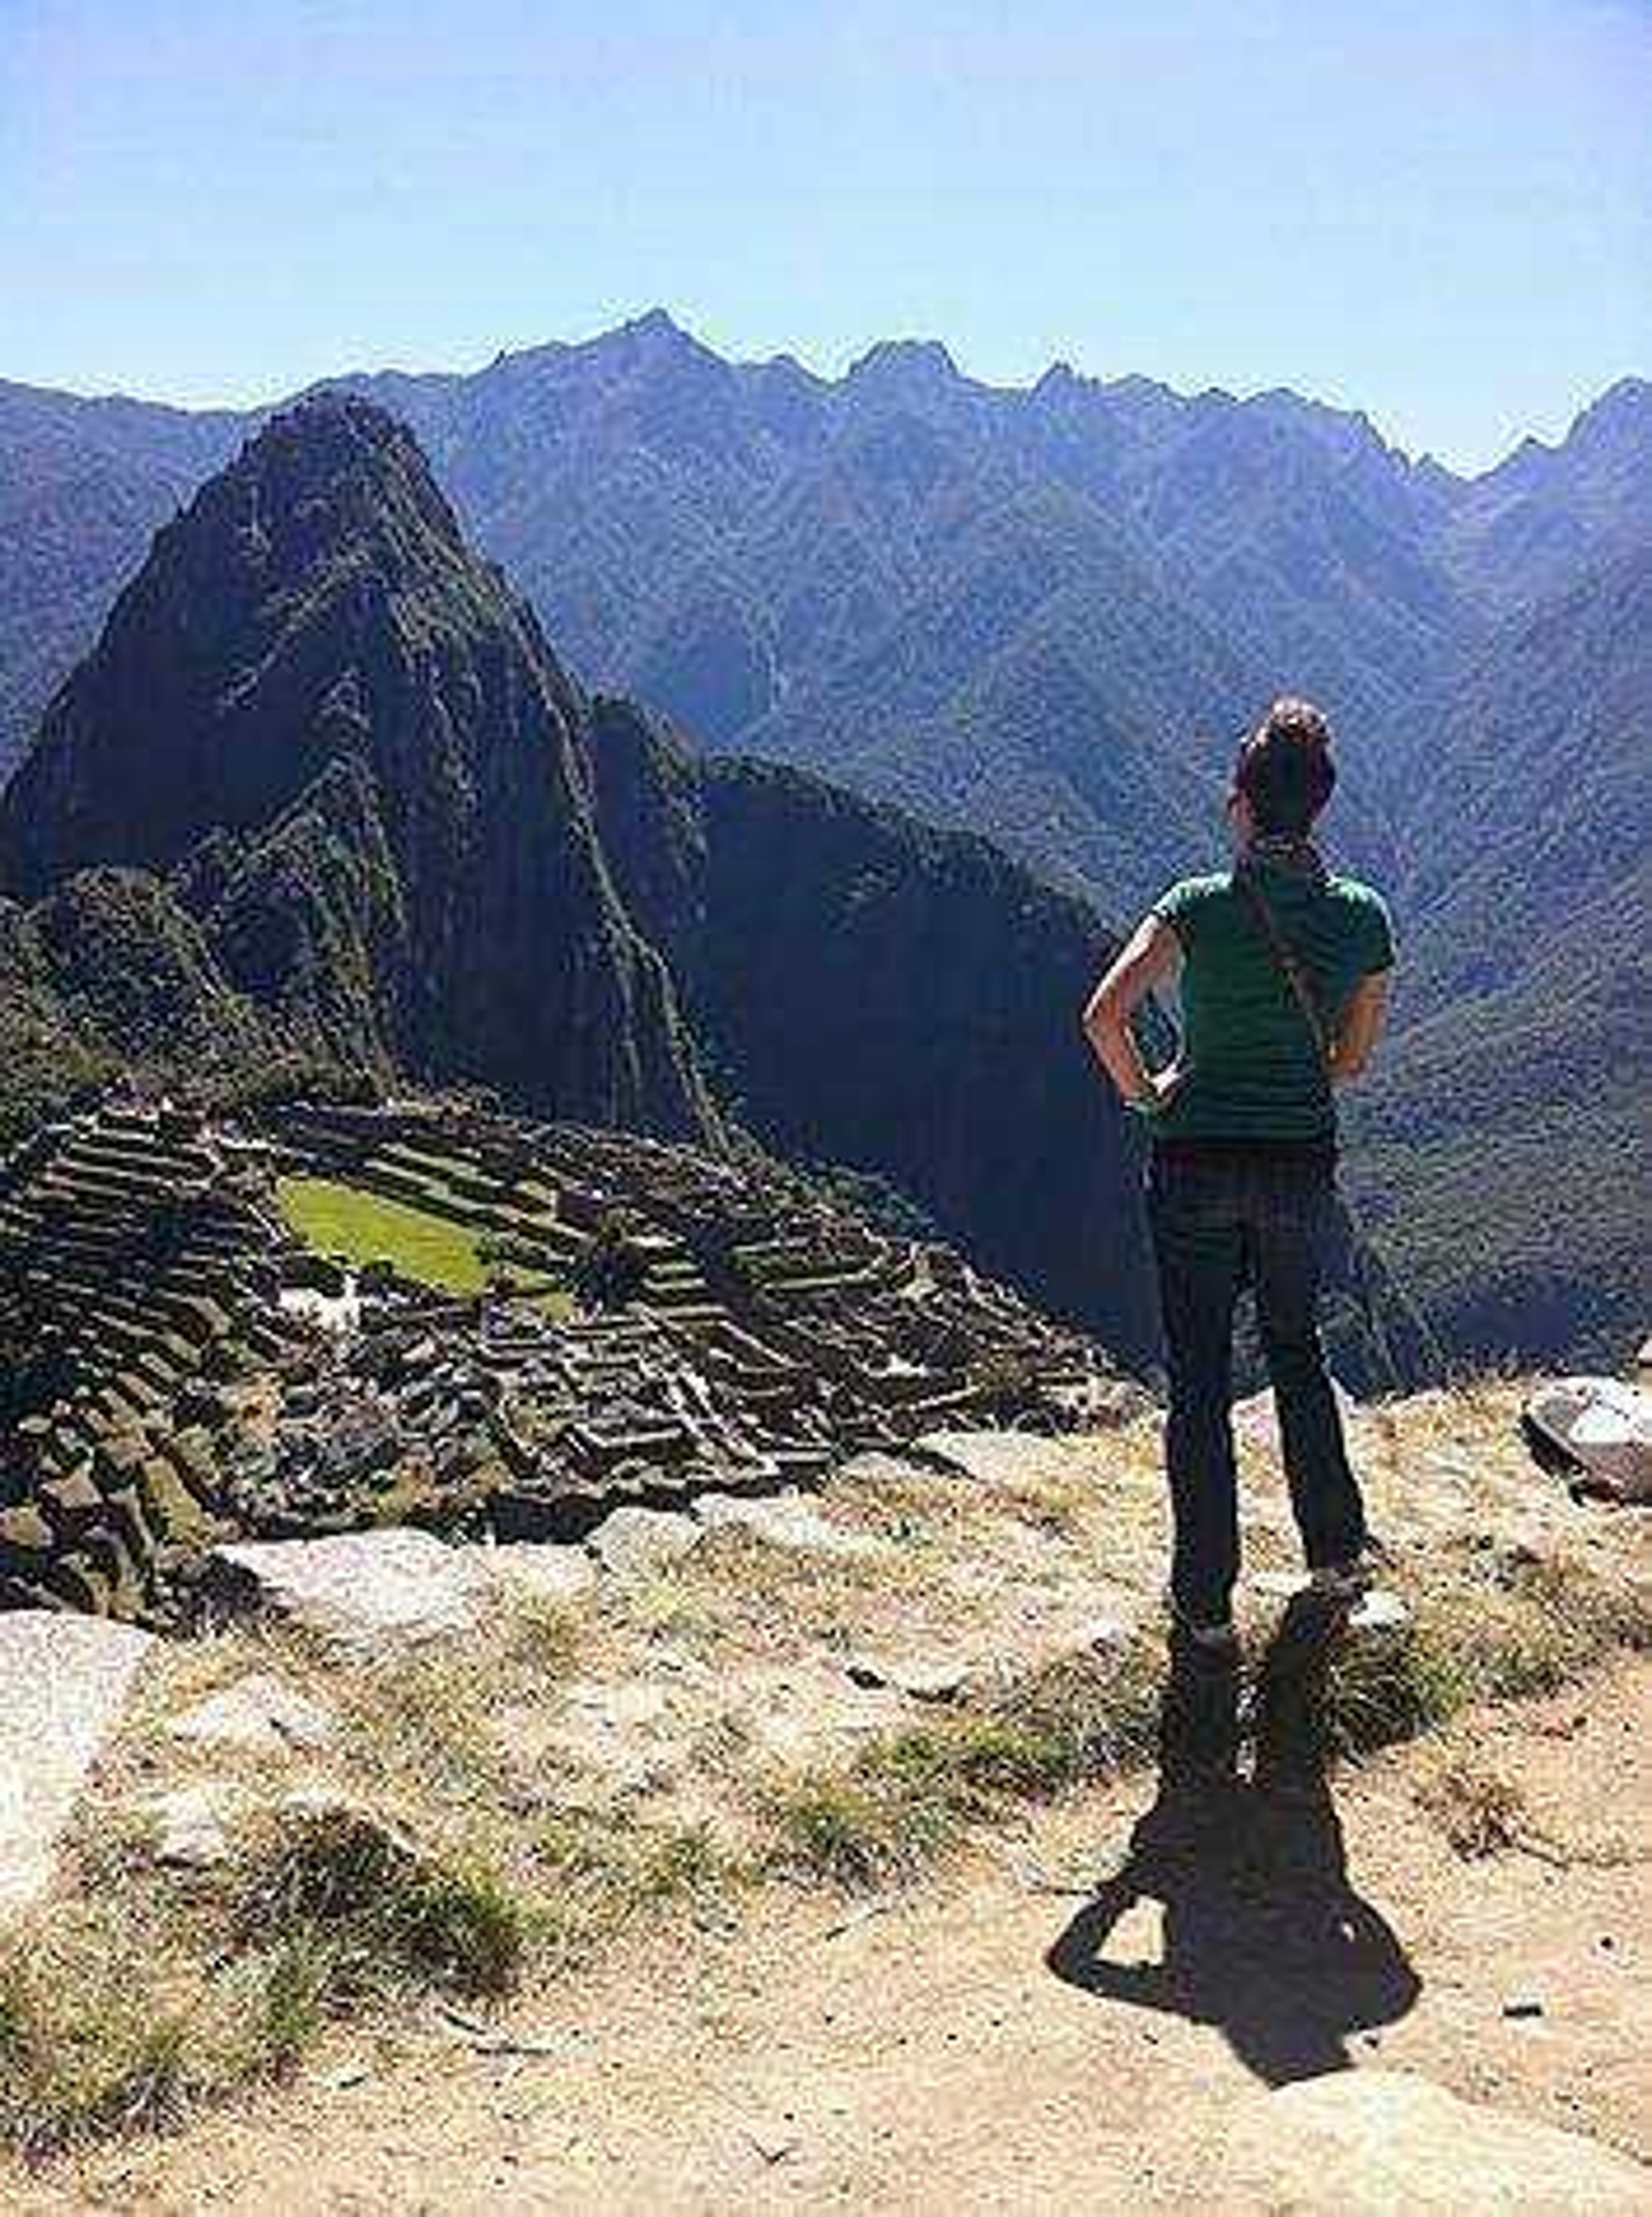 Southeast student Lauren Law looking out at Machu Picchu in the Cuso region of Peru. Submitted photo